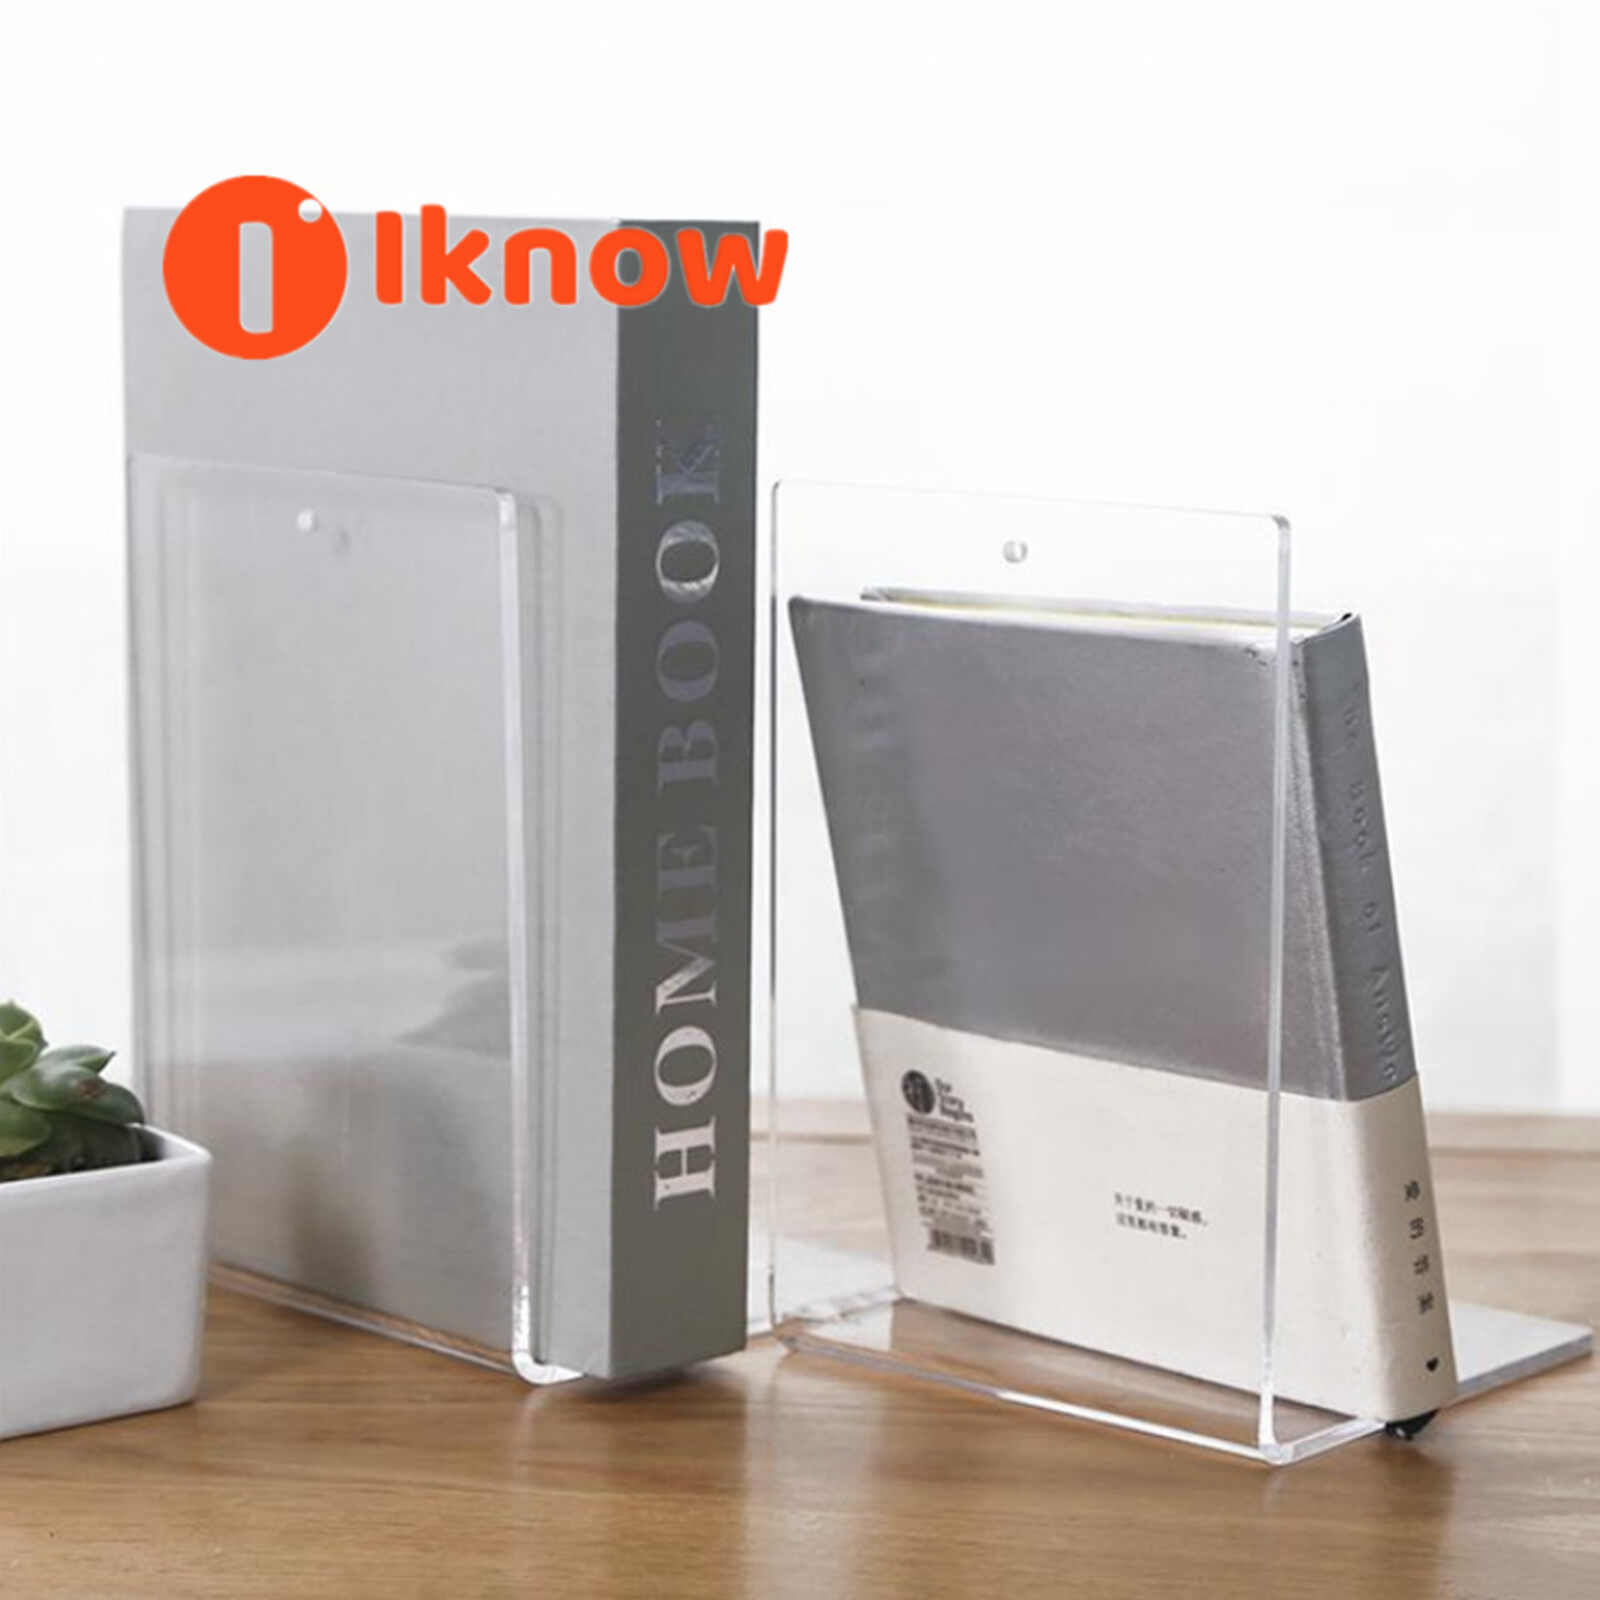 I know 2PCS Bookends L-shaped Clear Acrylic Book Ends Holders Desktop